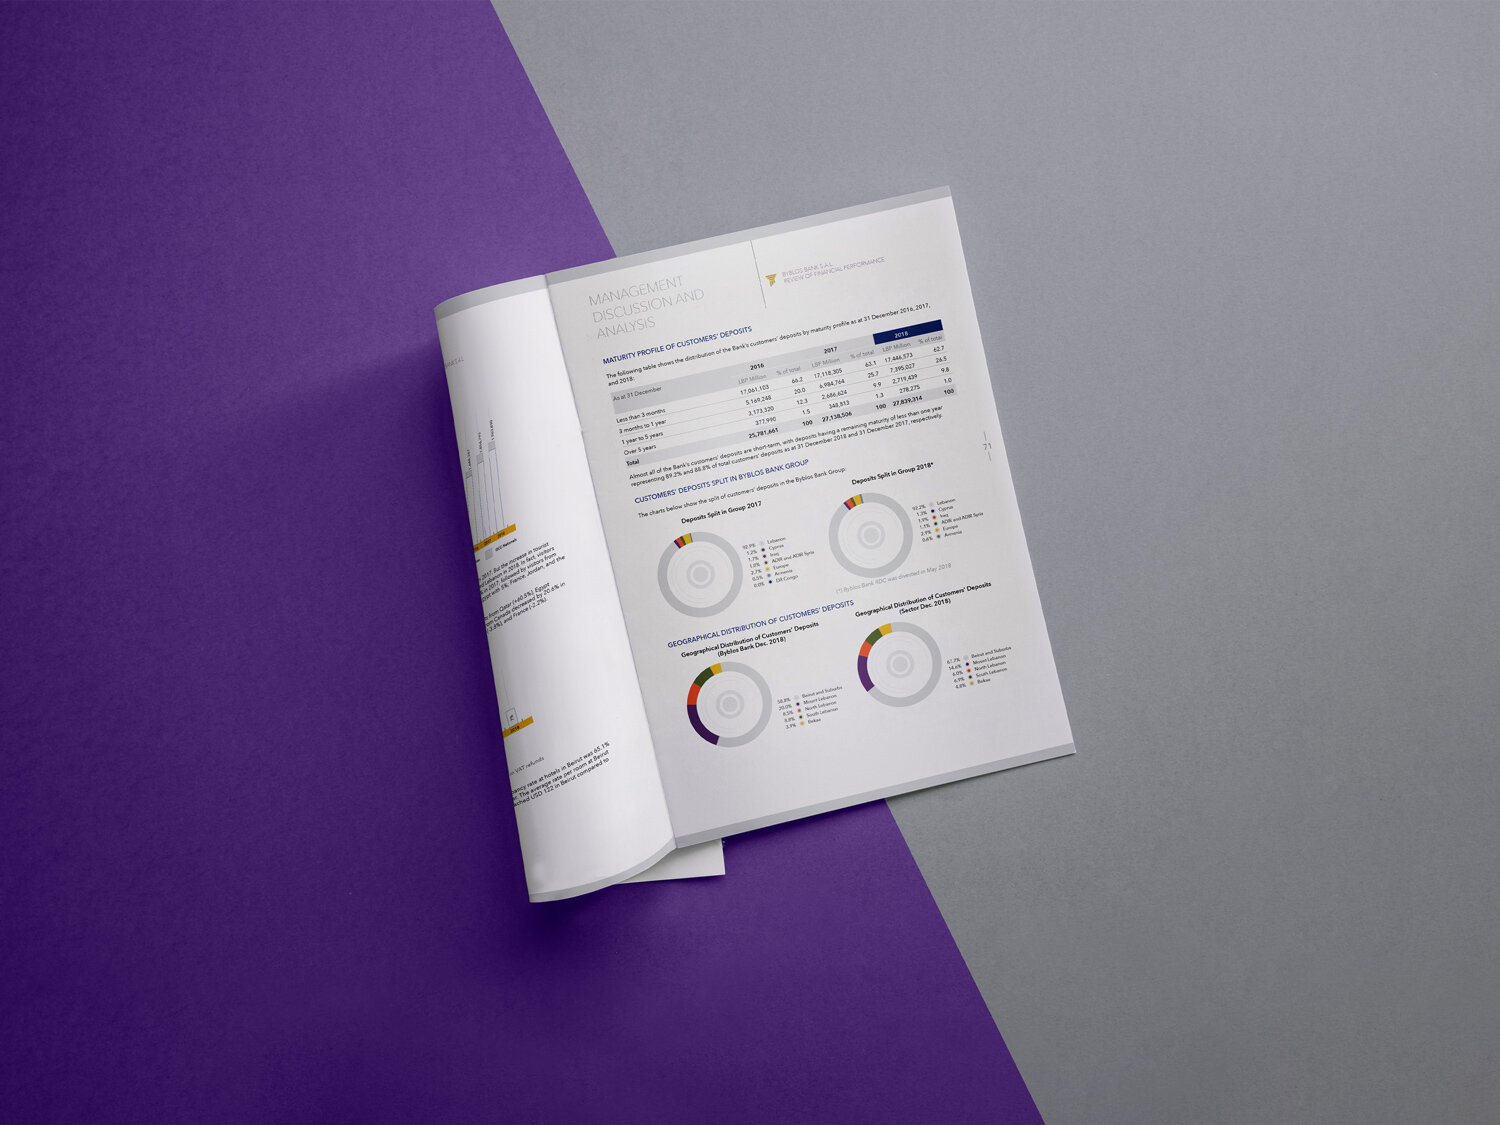 2_BB_Byblos_Bank_annual_report_corporate_design_Circle_visual_communication_branding_agency_layout.jpg